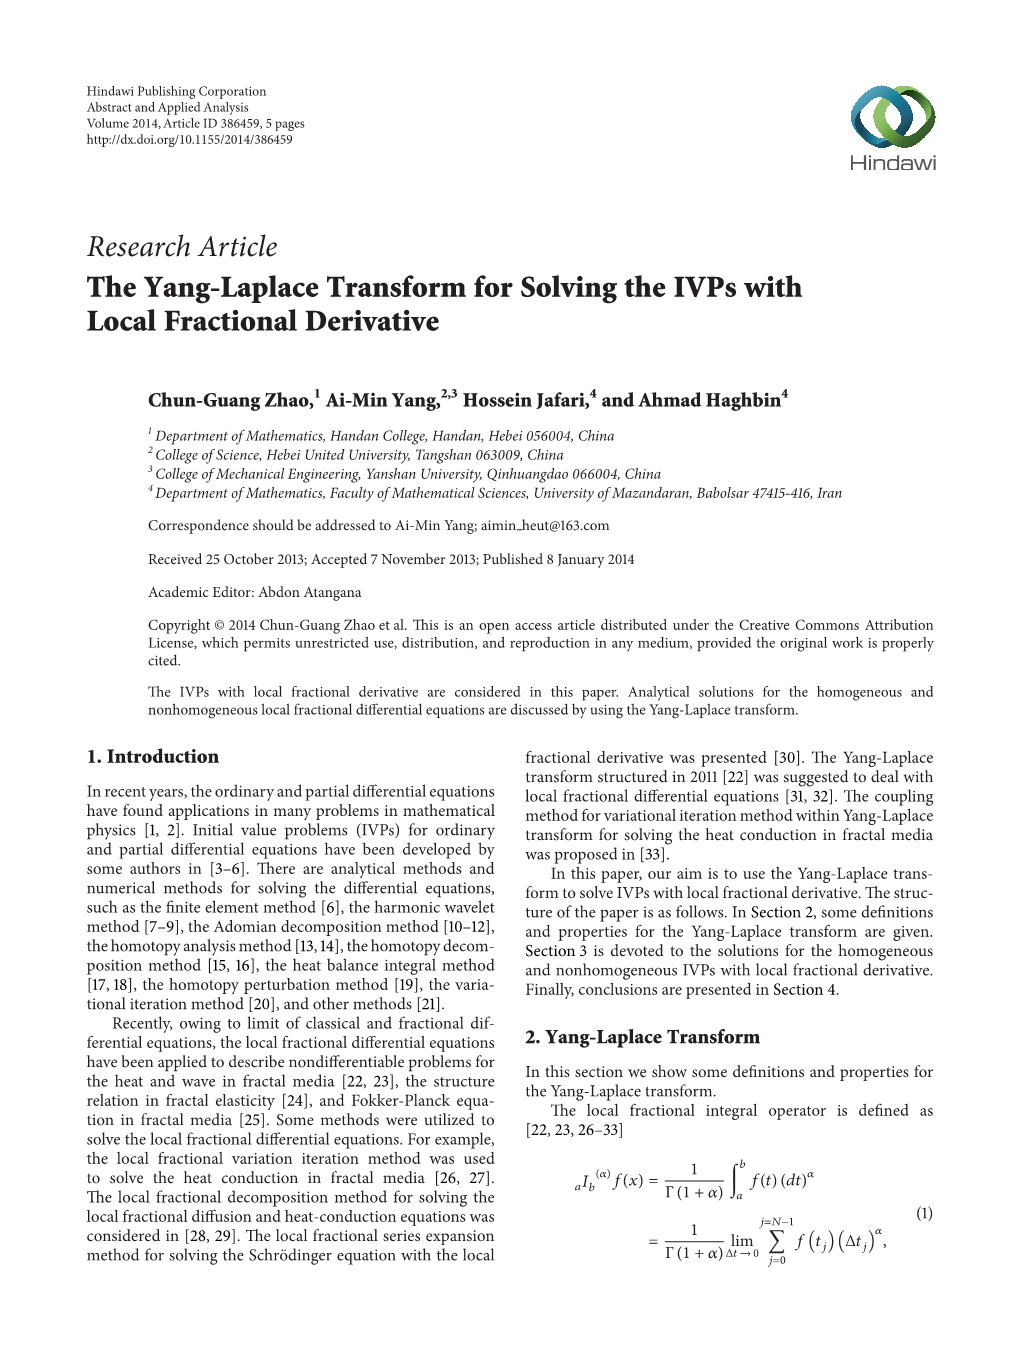 The Yang-Laplace Transform for Solving the Ivps with Local Fractional Derivative